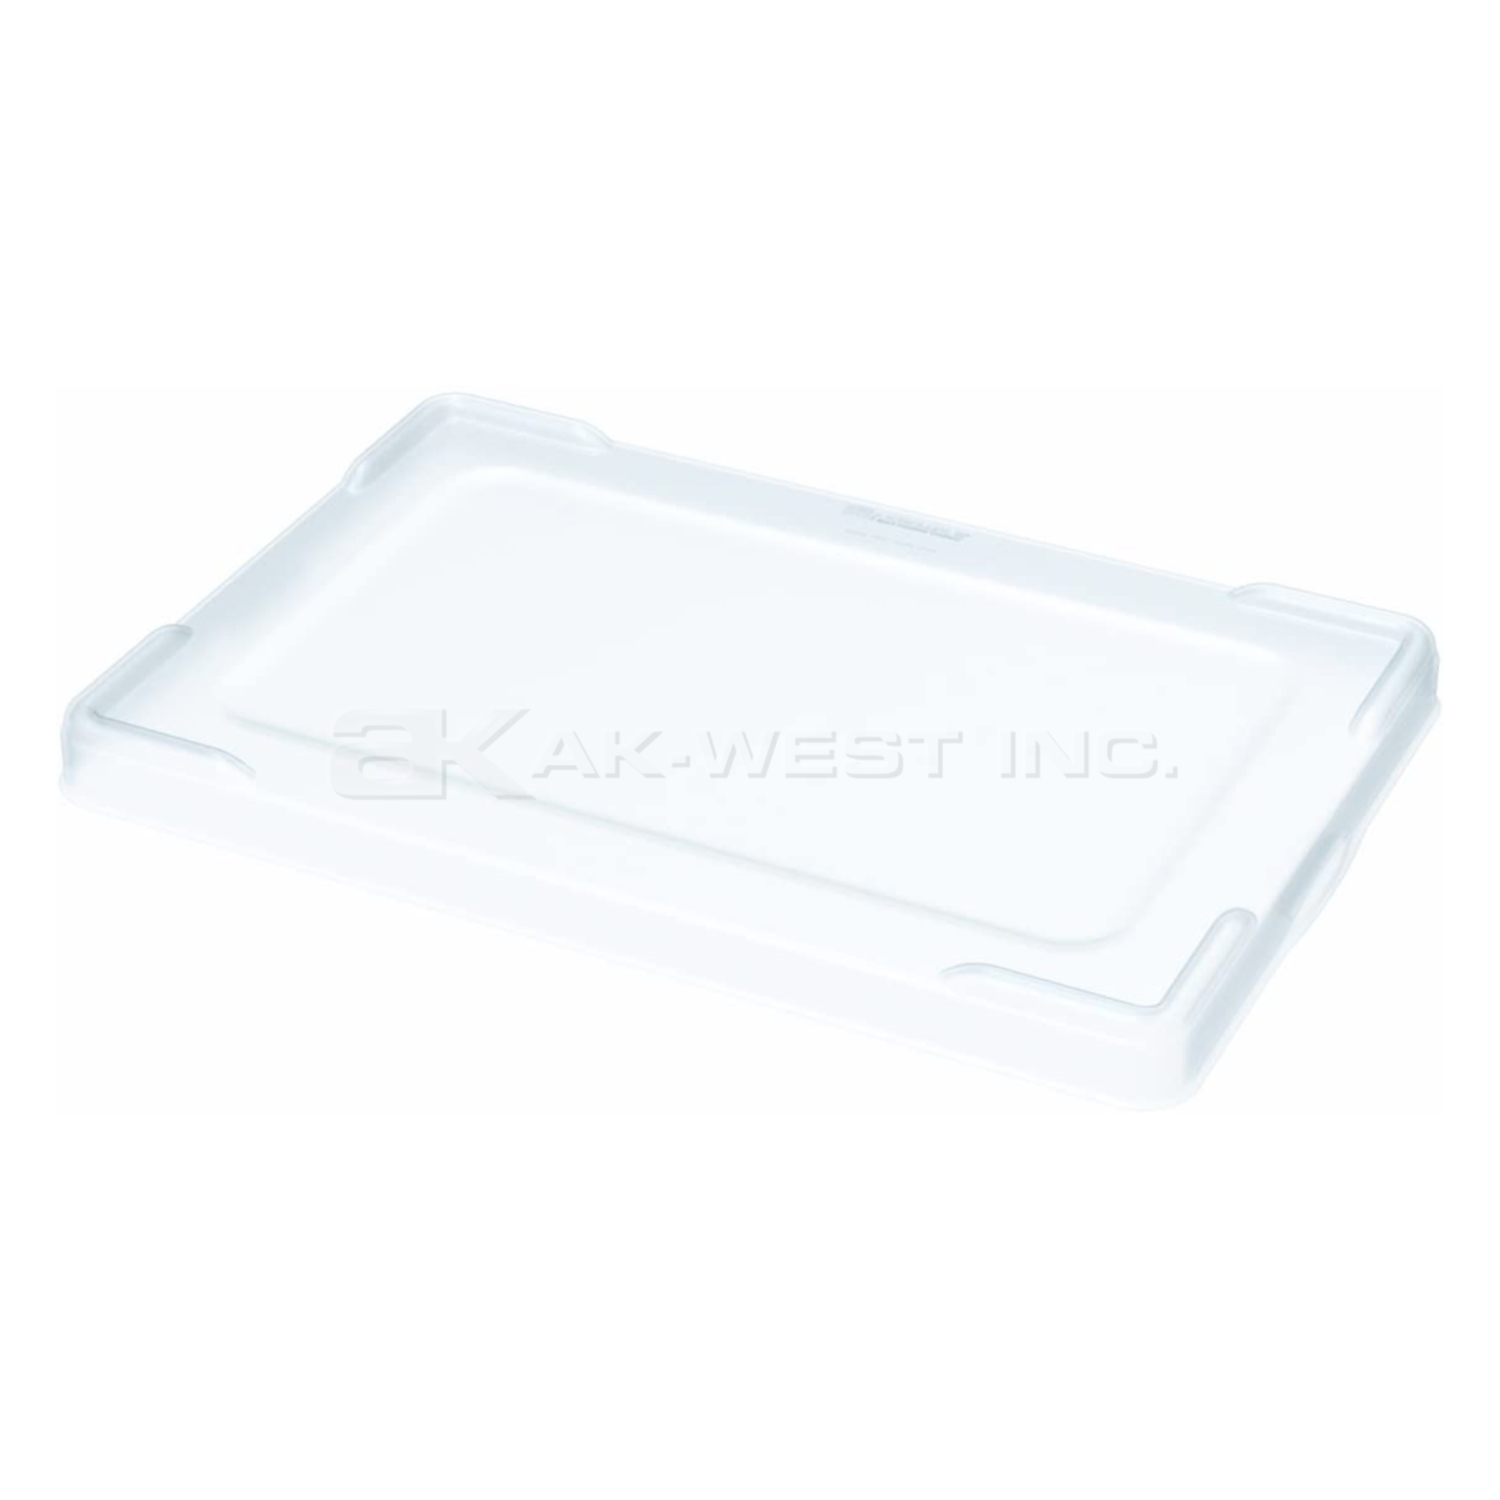 Clear, Lid For 33220, 33222, 33223, 33224, 33226, 33228 (3 Per Carton)